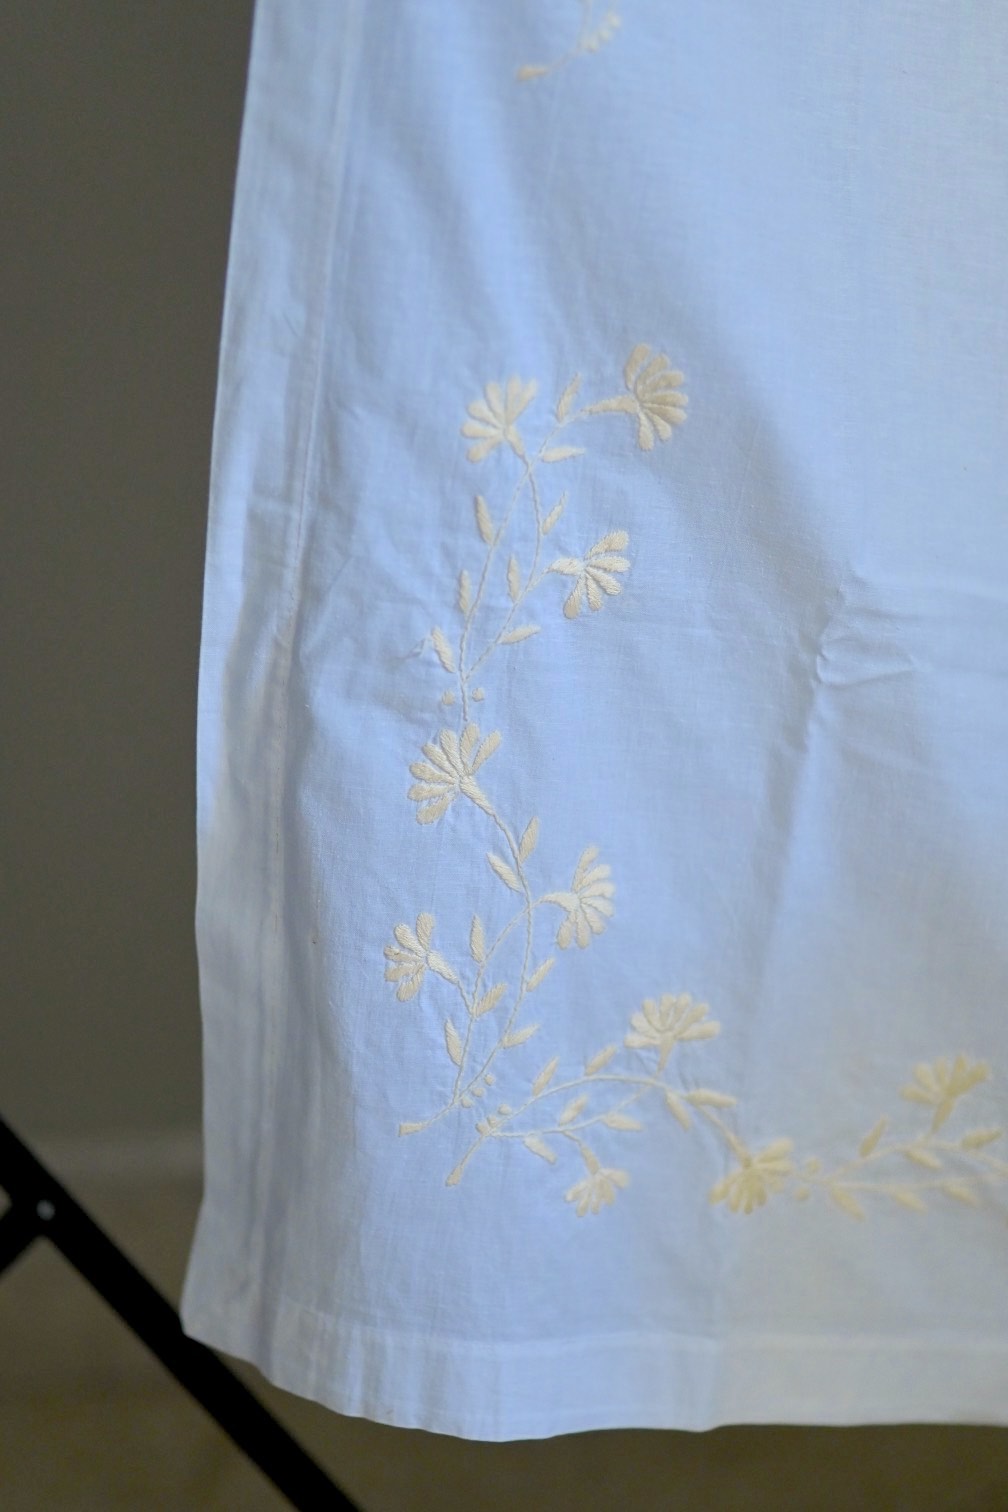 Hand Embroidered, Beige Floral, 96X60 Inches Tablecloth with Napkins - kinchecom